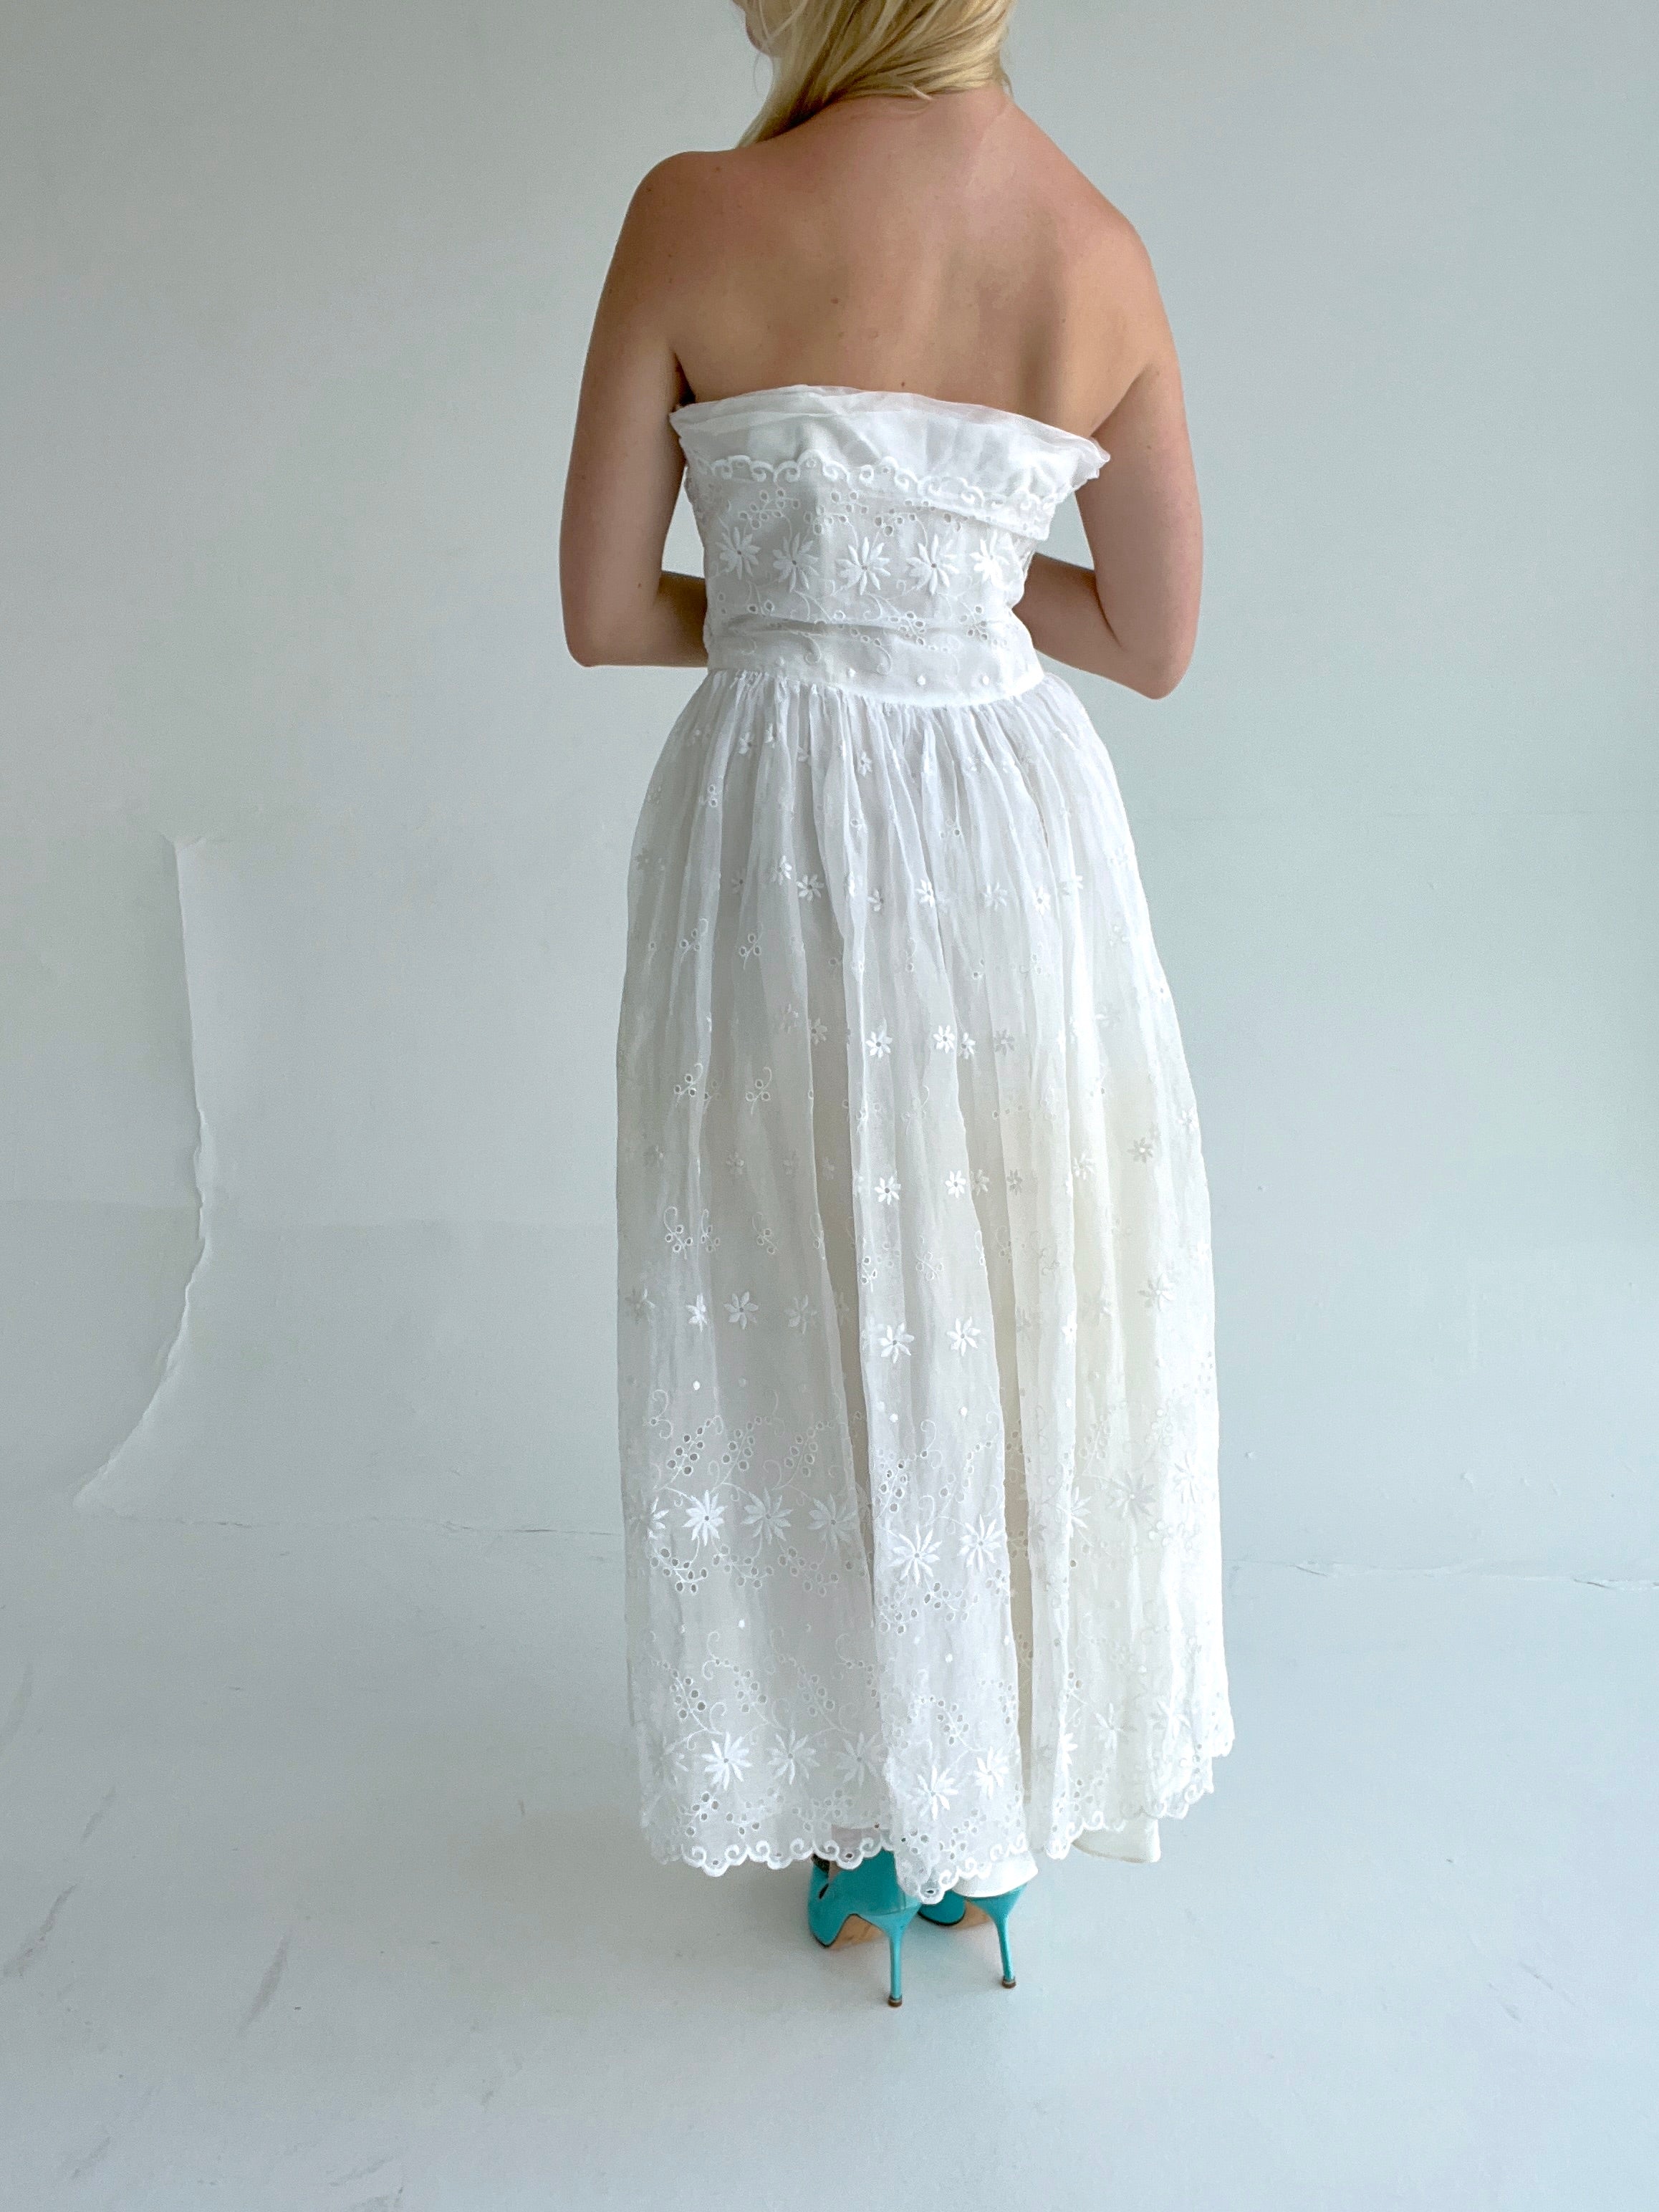 1930's White Strapless Embroidered Organza Gown